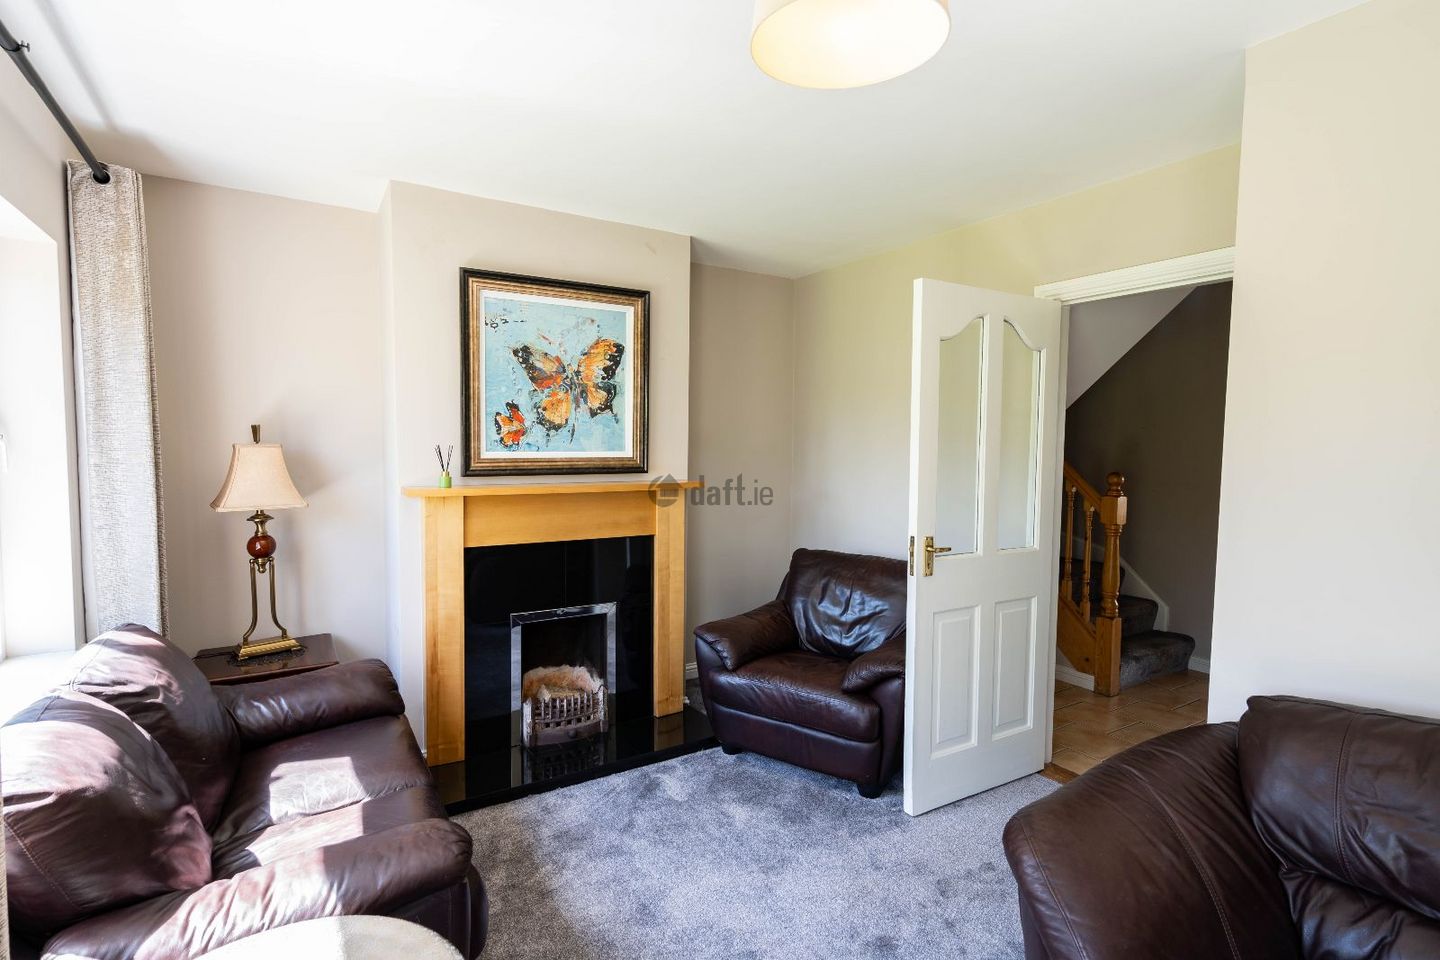 Waterside Townhouse, Inver Geal, Carrick-on-Shannon, Co. Leitrim